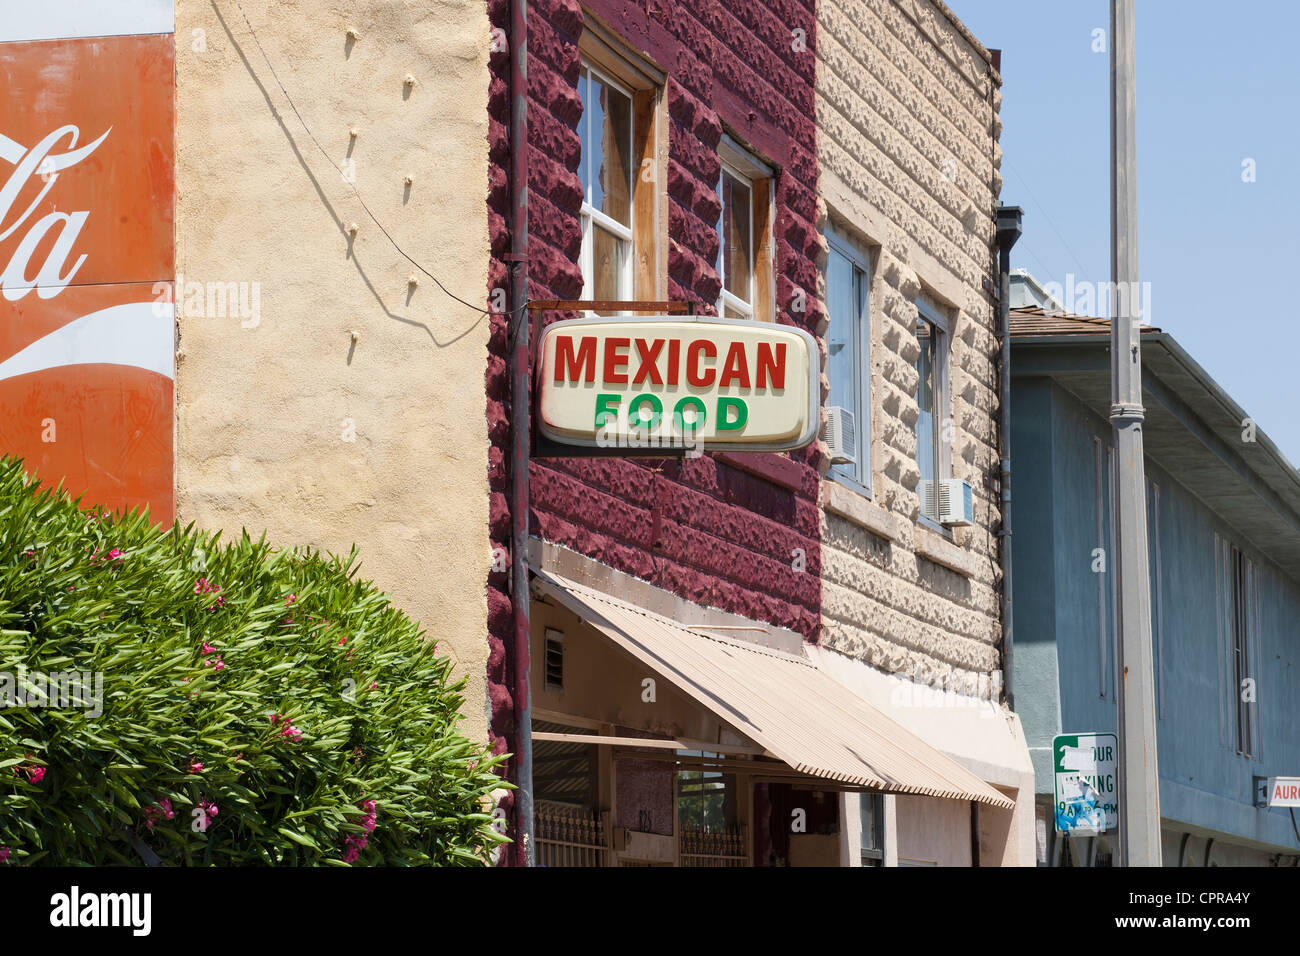 Mexican food restaurant sign Stock Photo